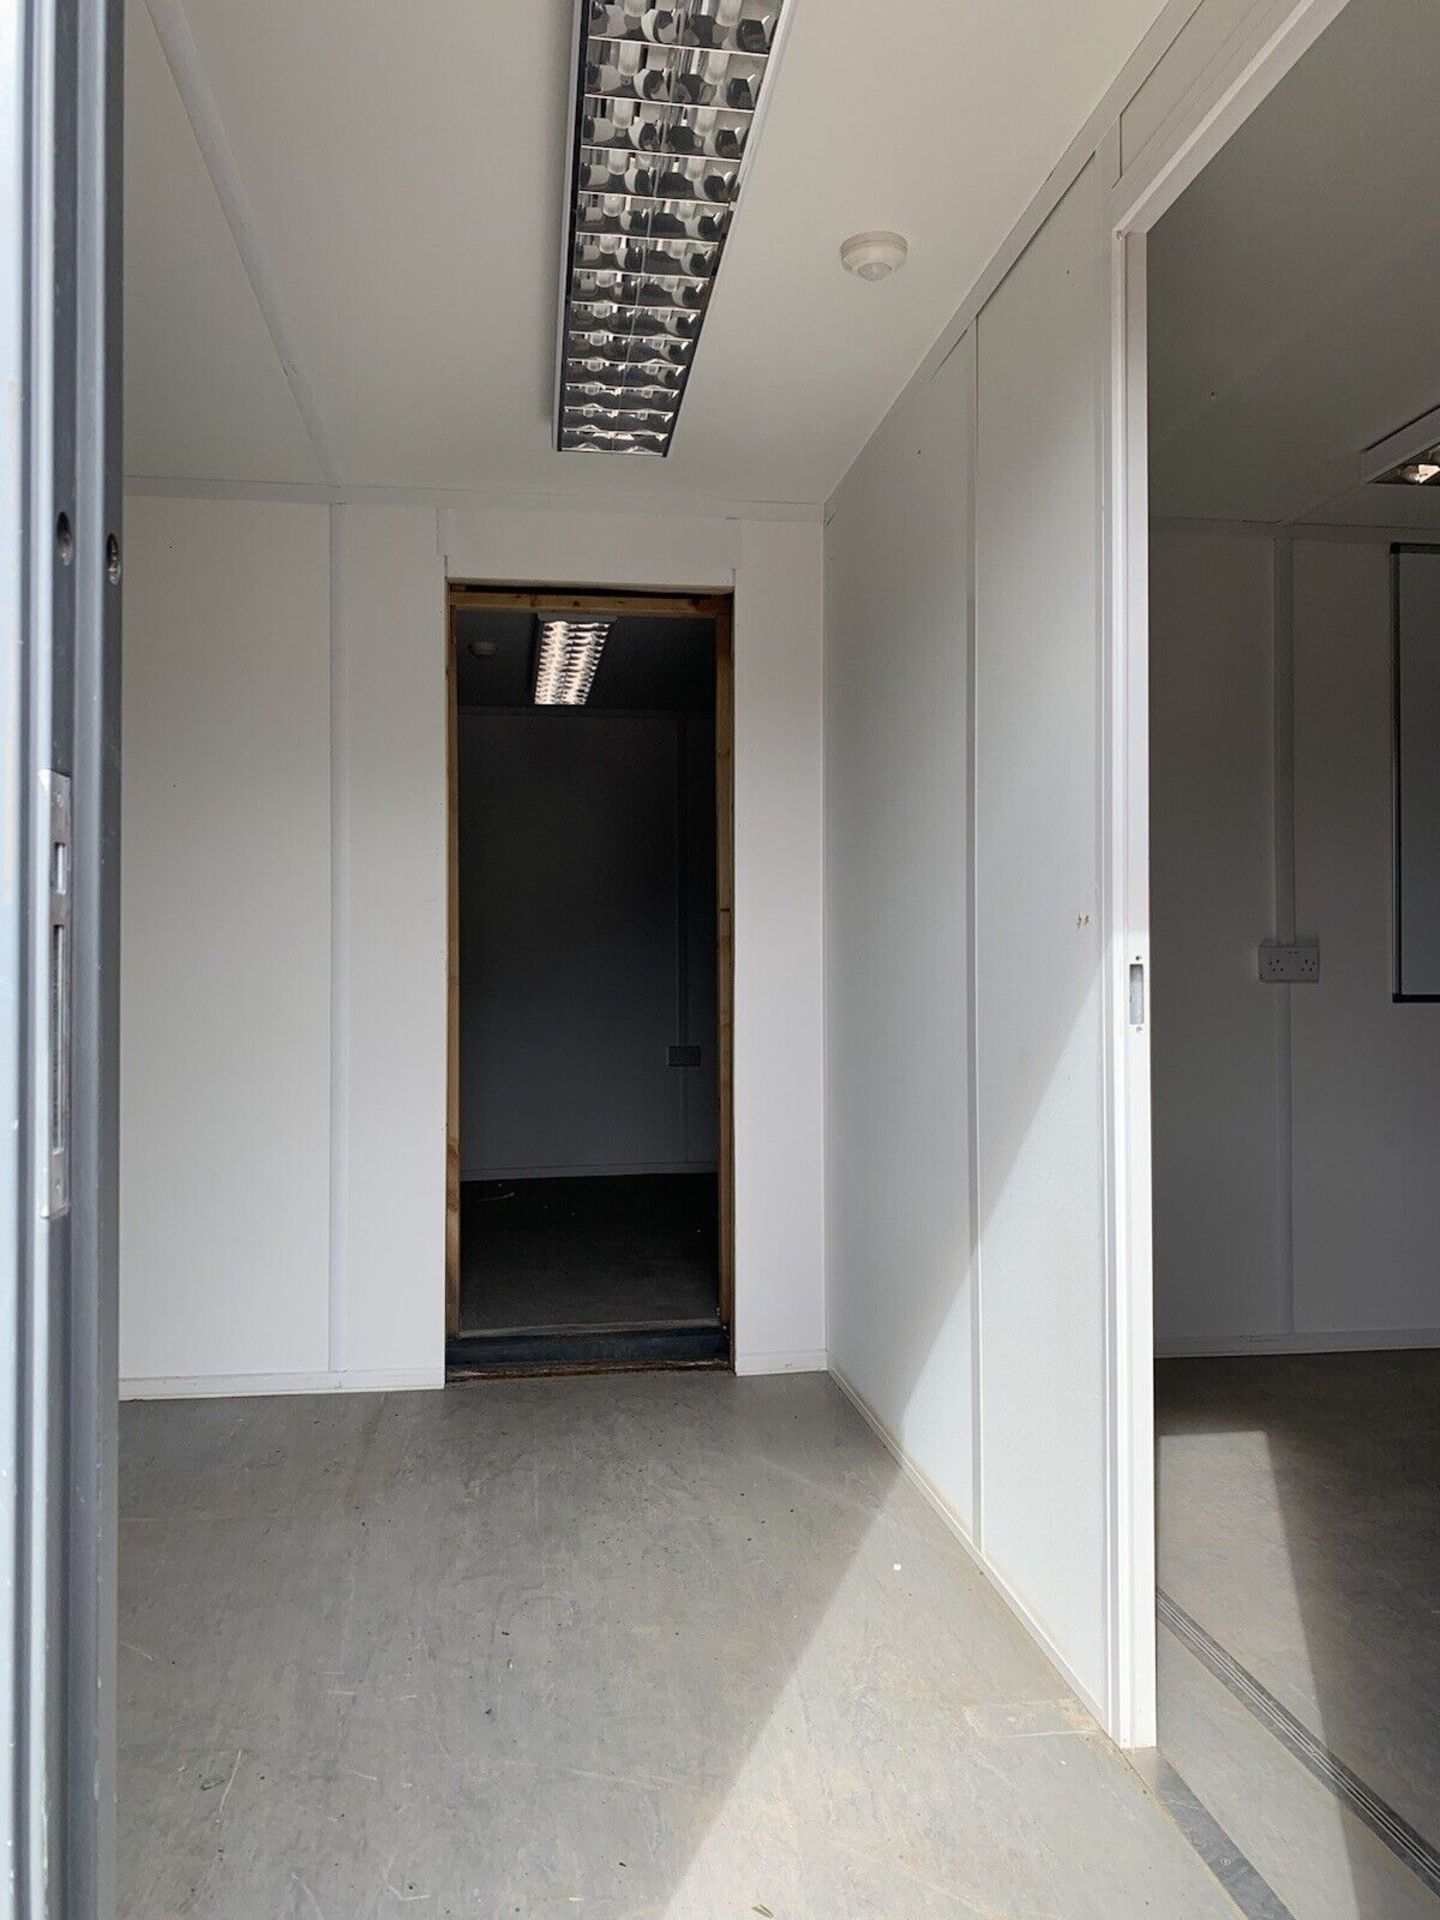 2 x 32ft Portable Offices that join together side-by-side - includes Site Cabin Canteen, Welfare Uni - Image 3 of 11